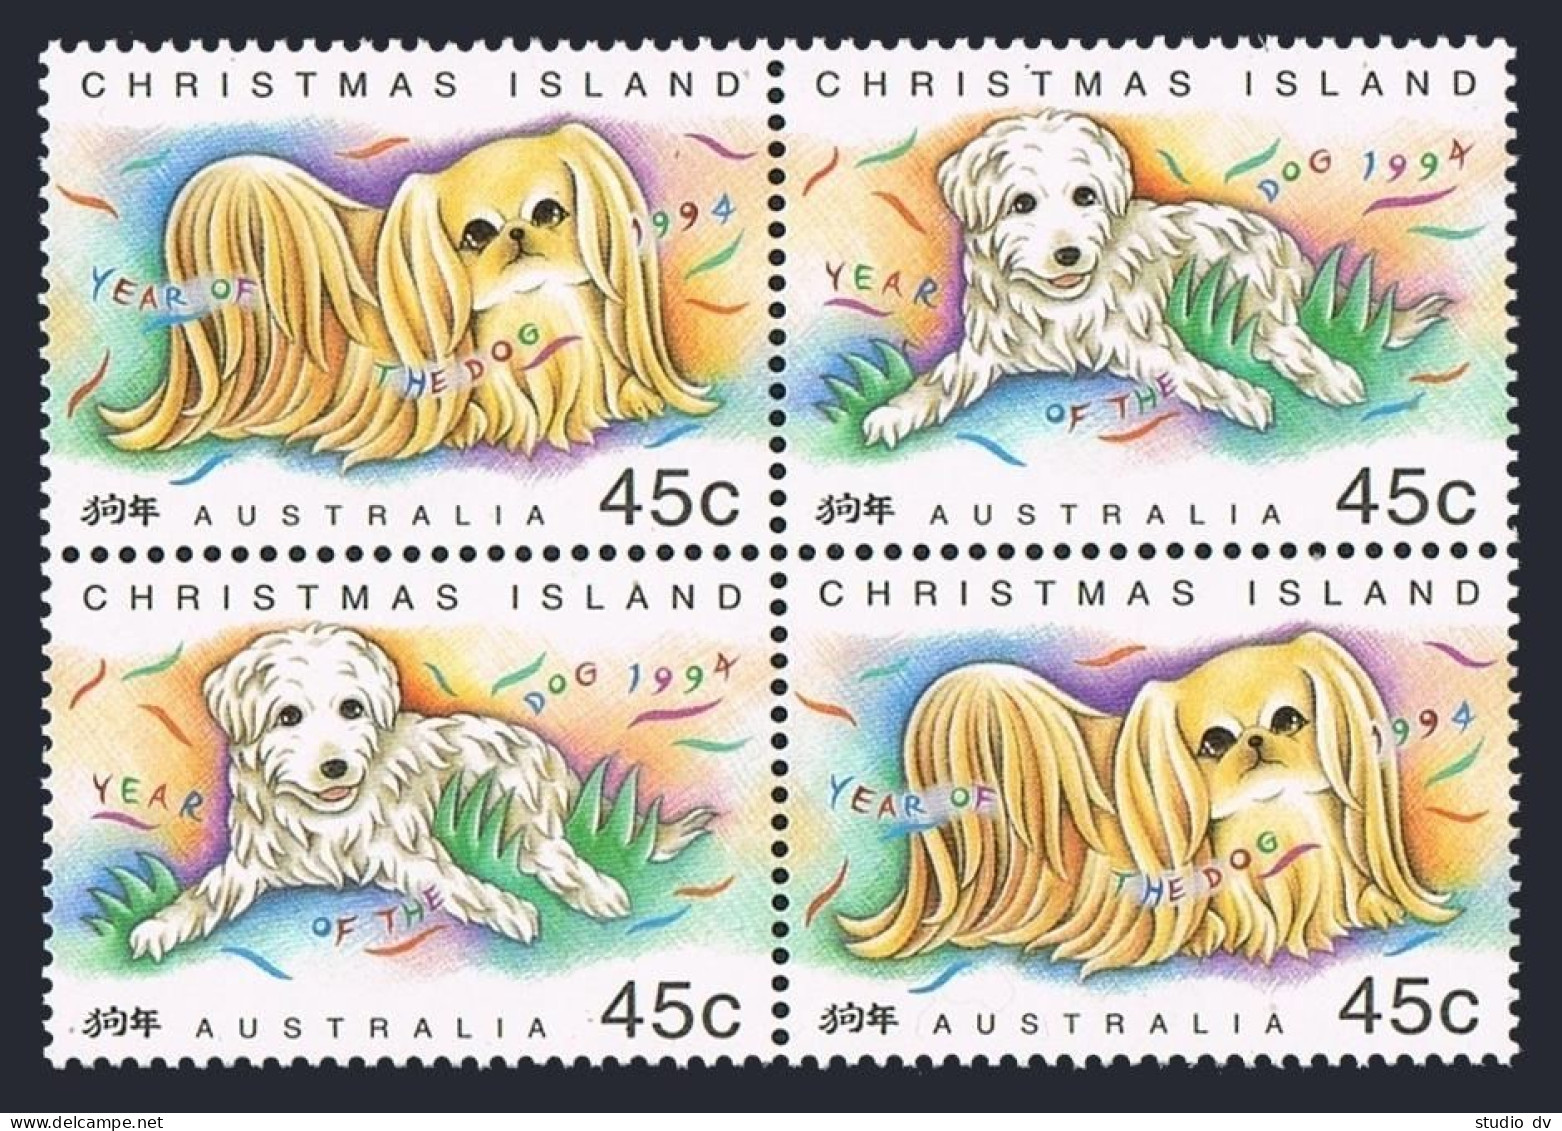 Christmas 358-359a Block,MNH.Michel 392-393. New Year 1994.Lunar Year Of The Dog - Christmaseiland